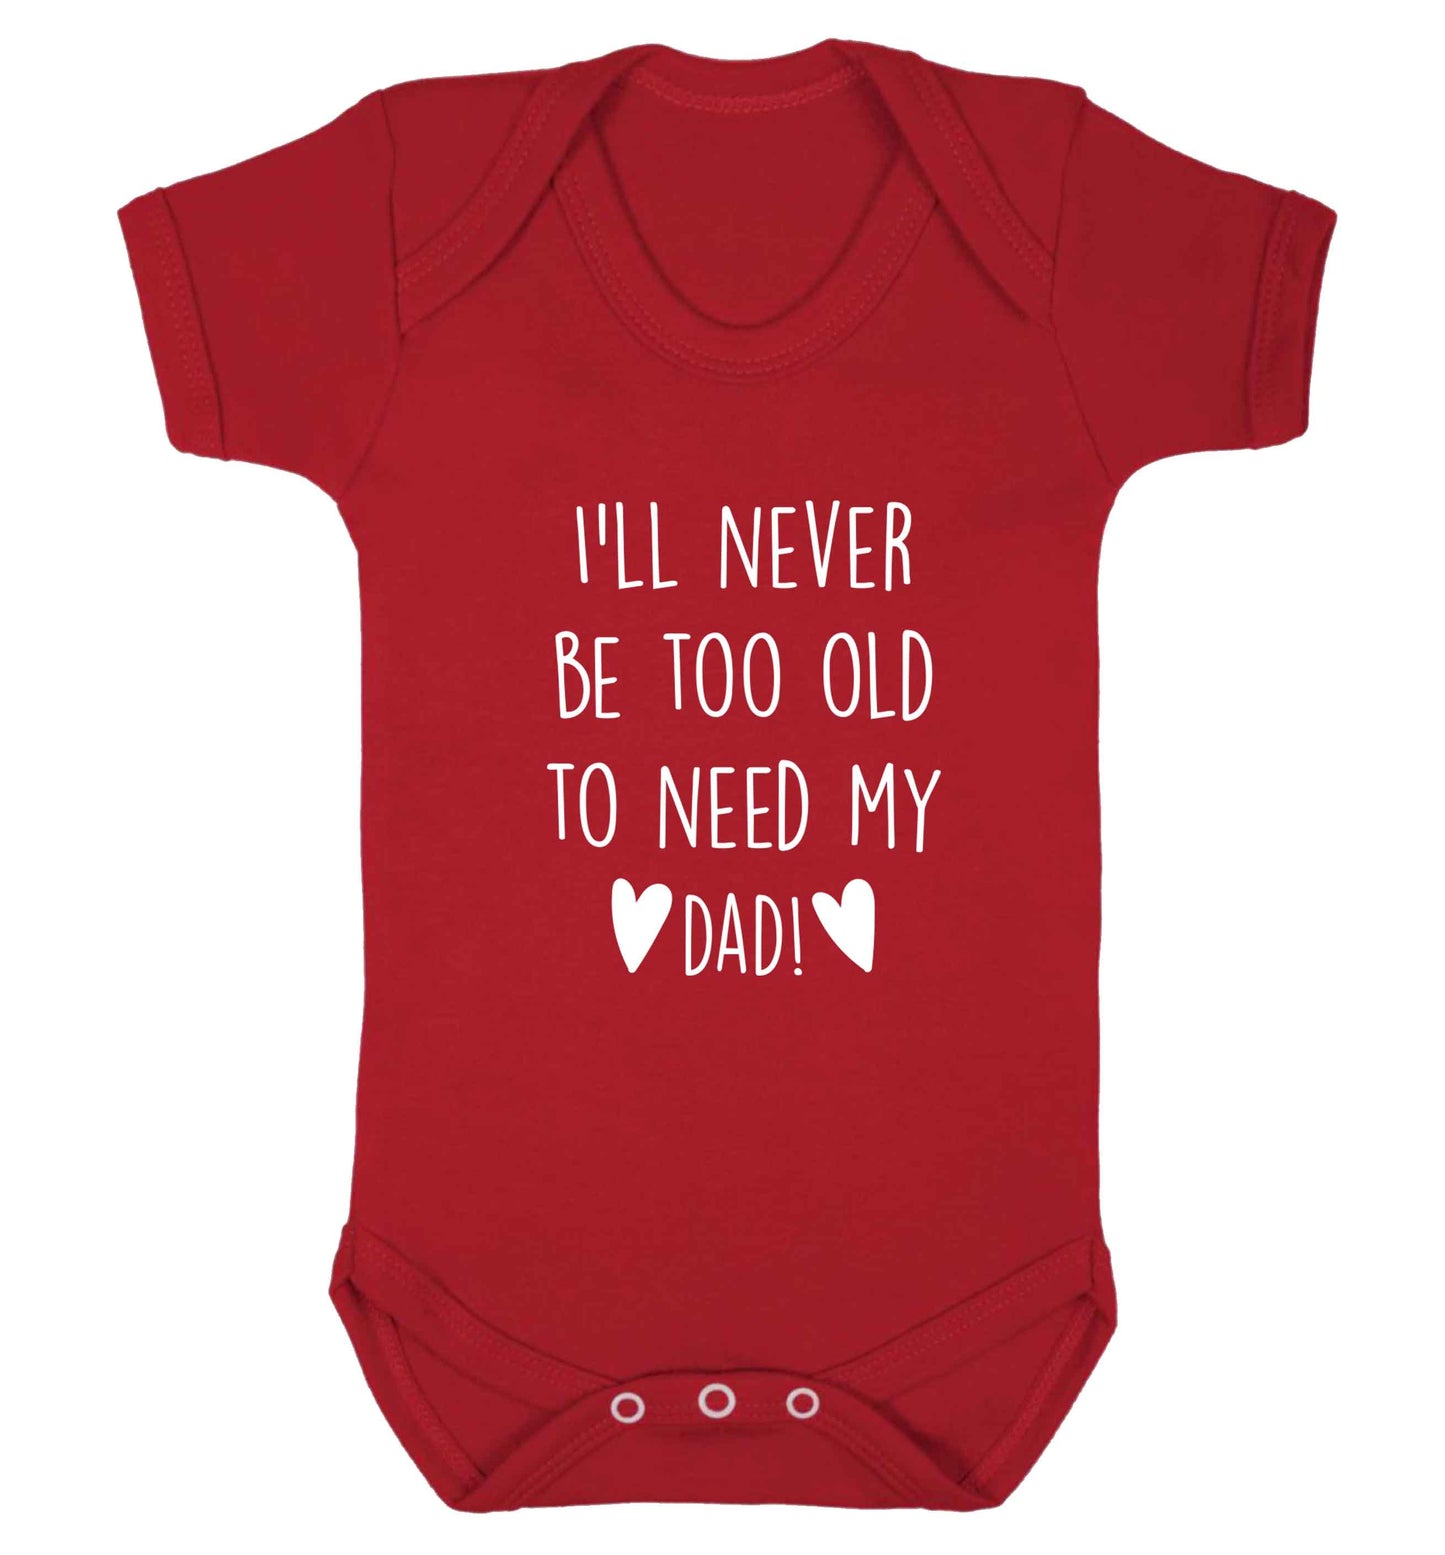 I'll never be too old to need my dad baby vest red 18-24 months